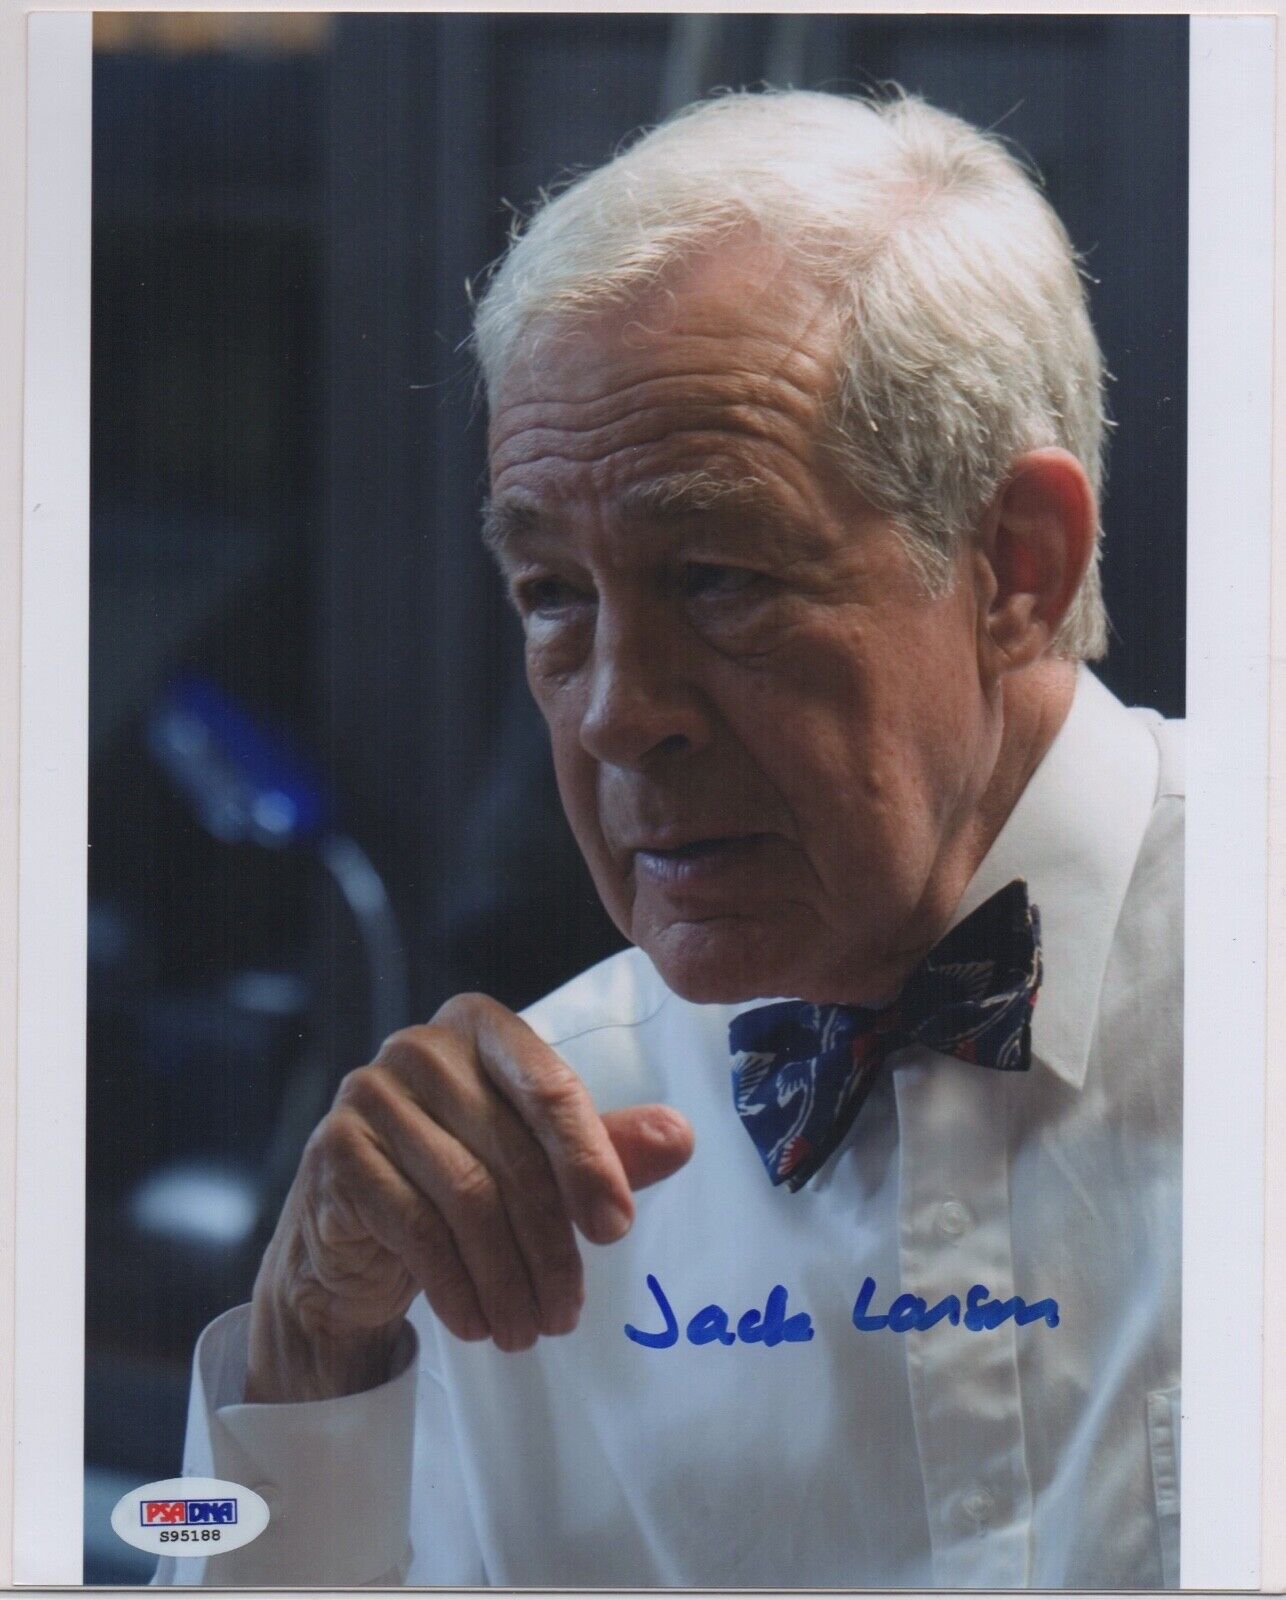 JACK LARSON signed SUPERMAN 8x10 Photo Poster painting AUTOGRAPH auto PSA DNA Reeves RARE